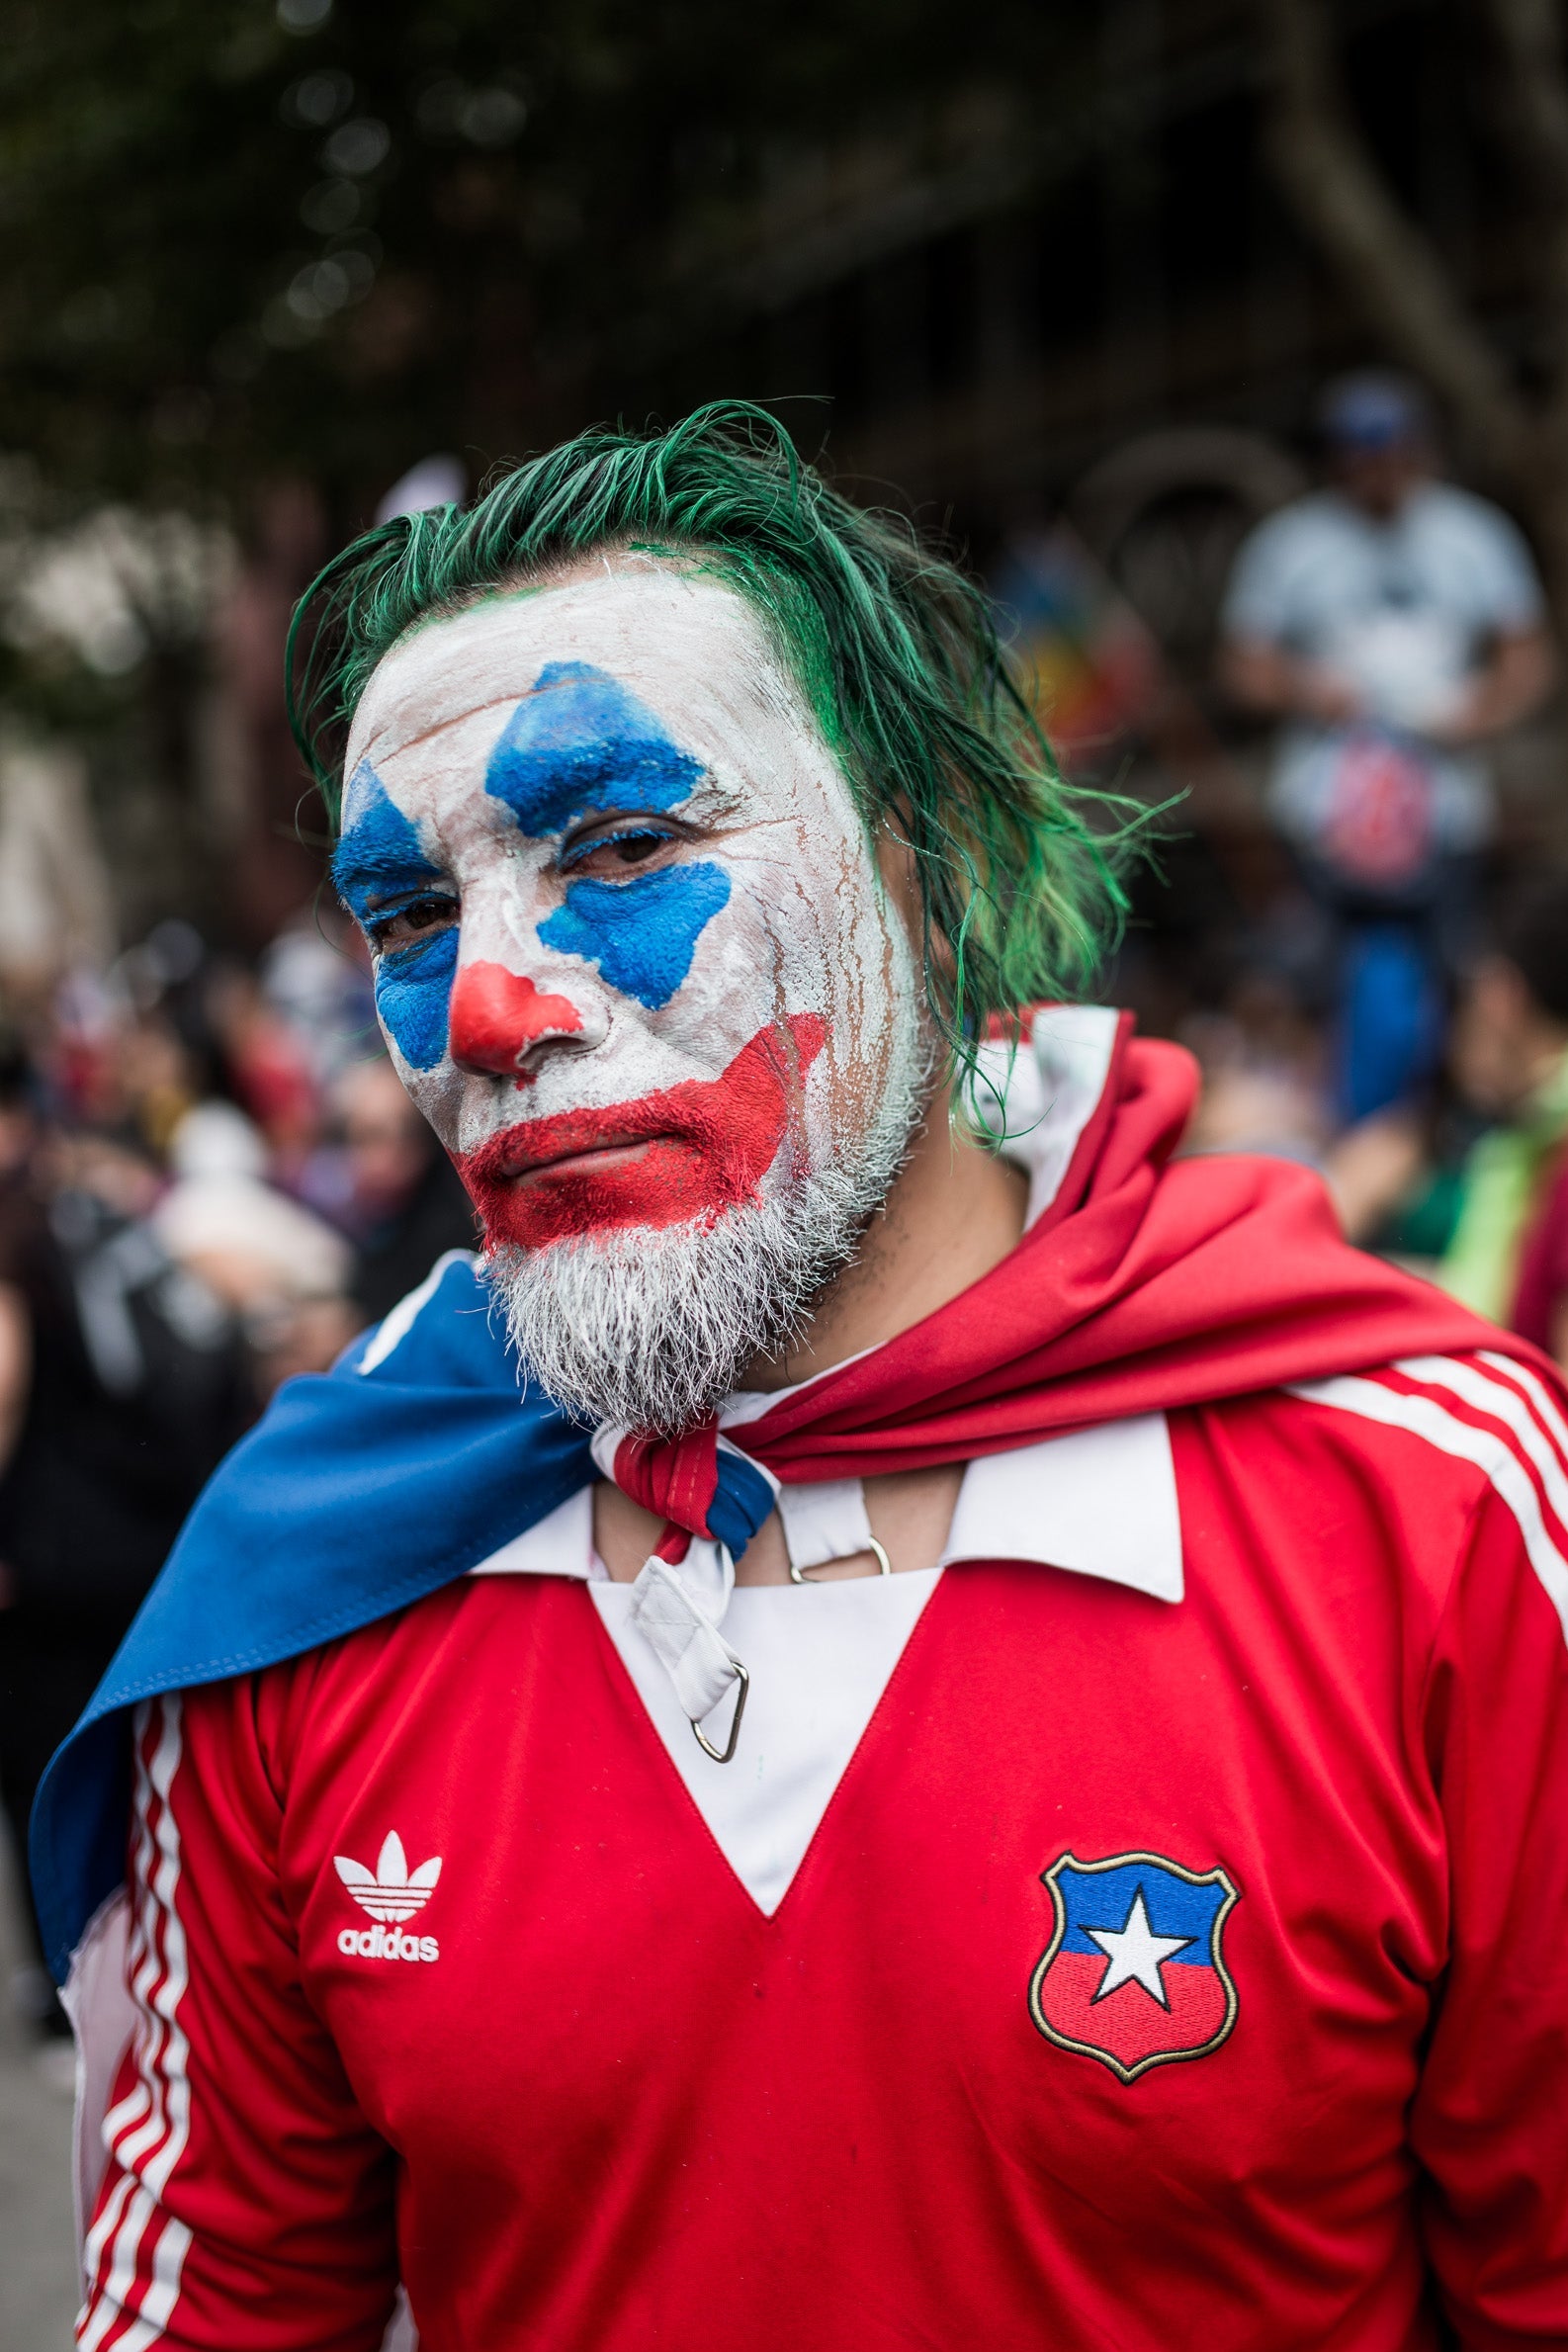 Protester in Chile dressed as The Joker